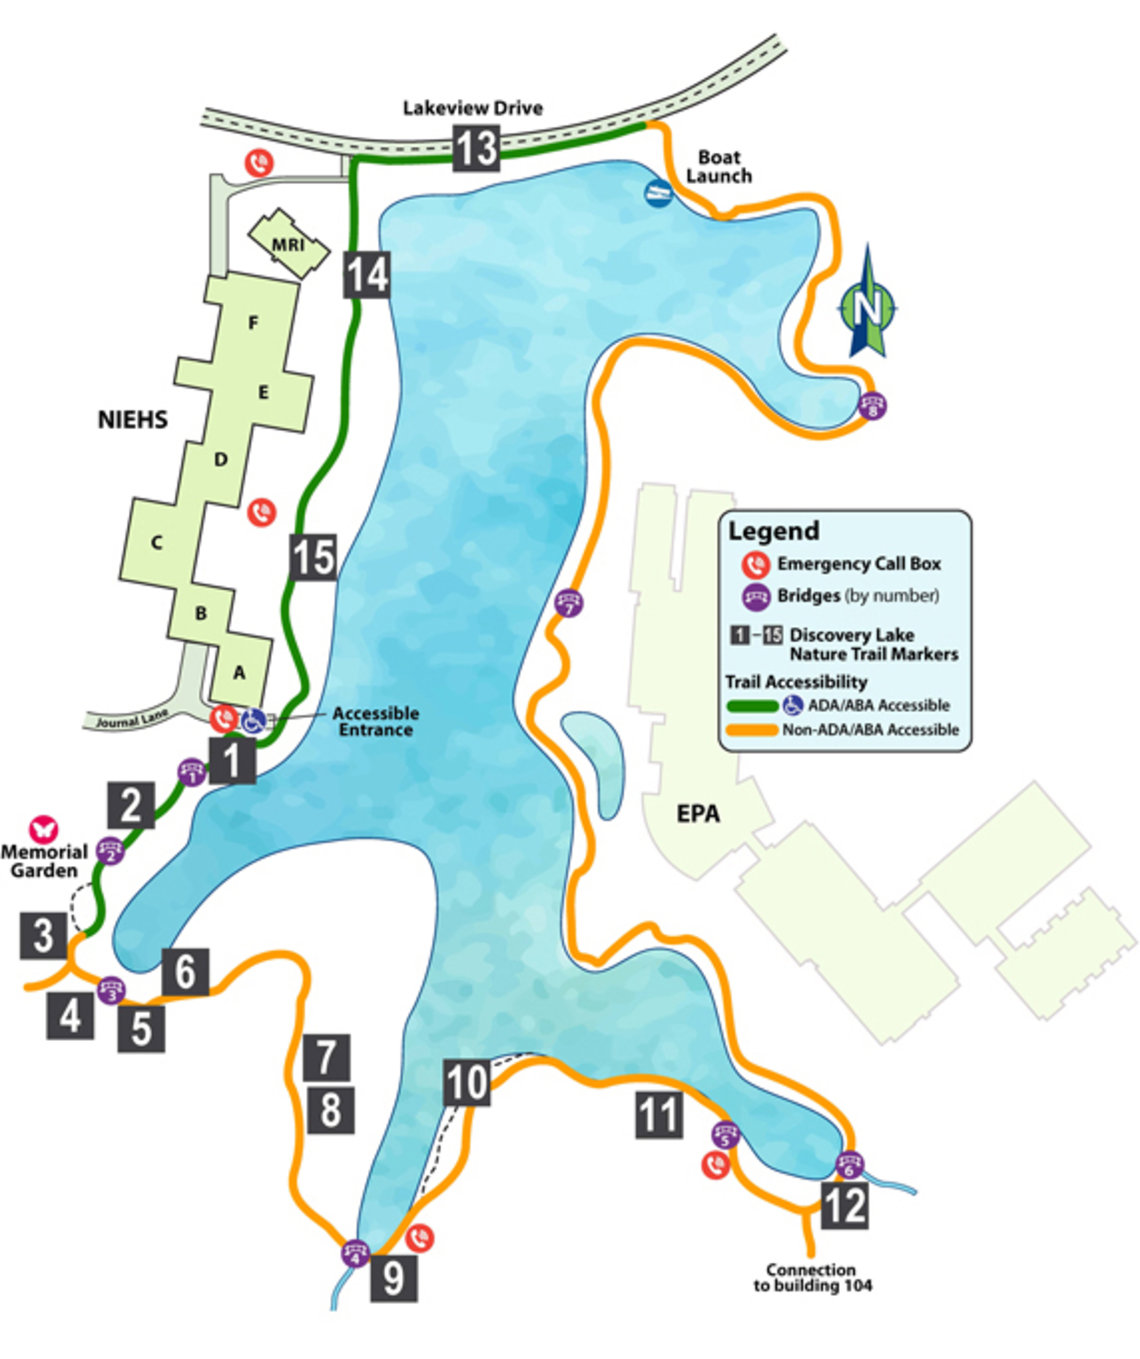 A trail map of Discovery Lake with a legend